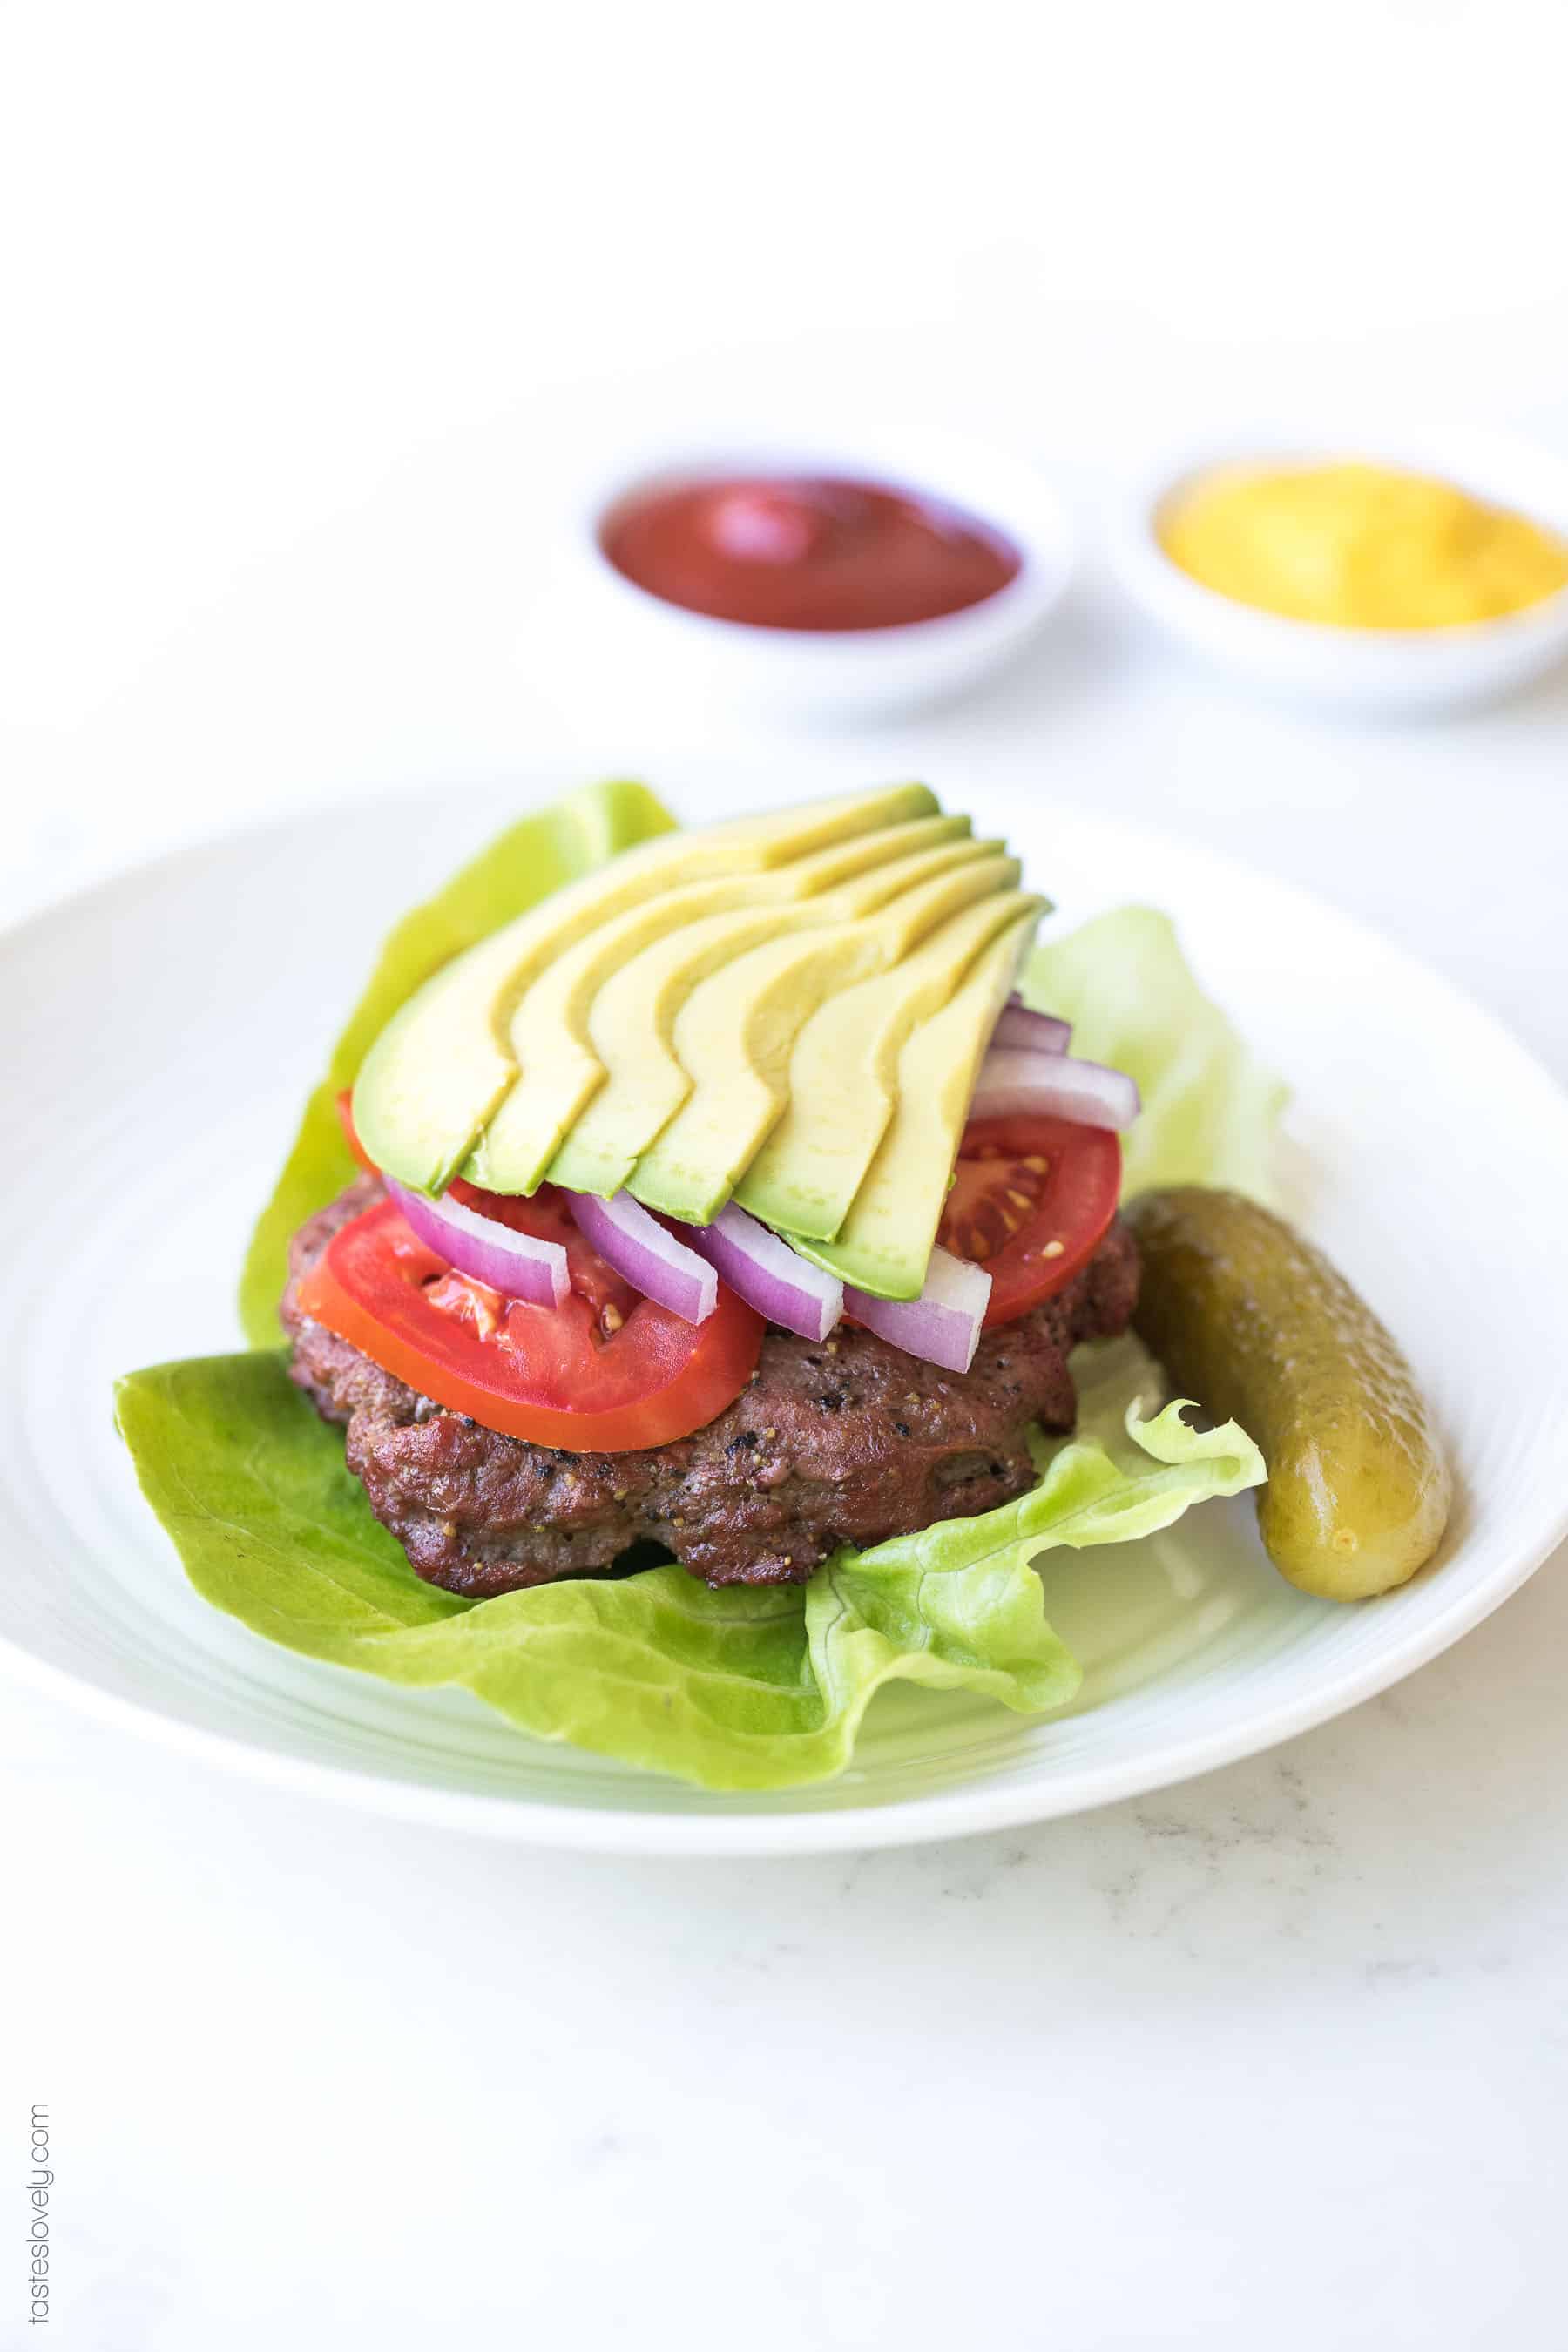 Perfect Paleo + Whole30 Burger Recipe with a Homemade Worcestershire Sauce - the secret to the most flavorful and juicy paleo + whole30 hamburgers! #paleo #whole30 #glutenfree #grainfree #dairyfree #soyfree #sugarfree #lowcarb #keto #realfood #cleaneating